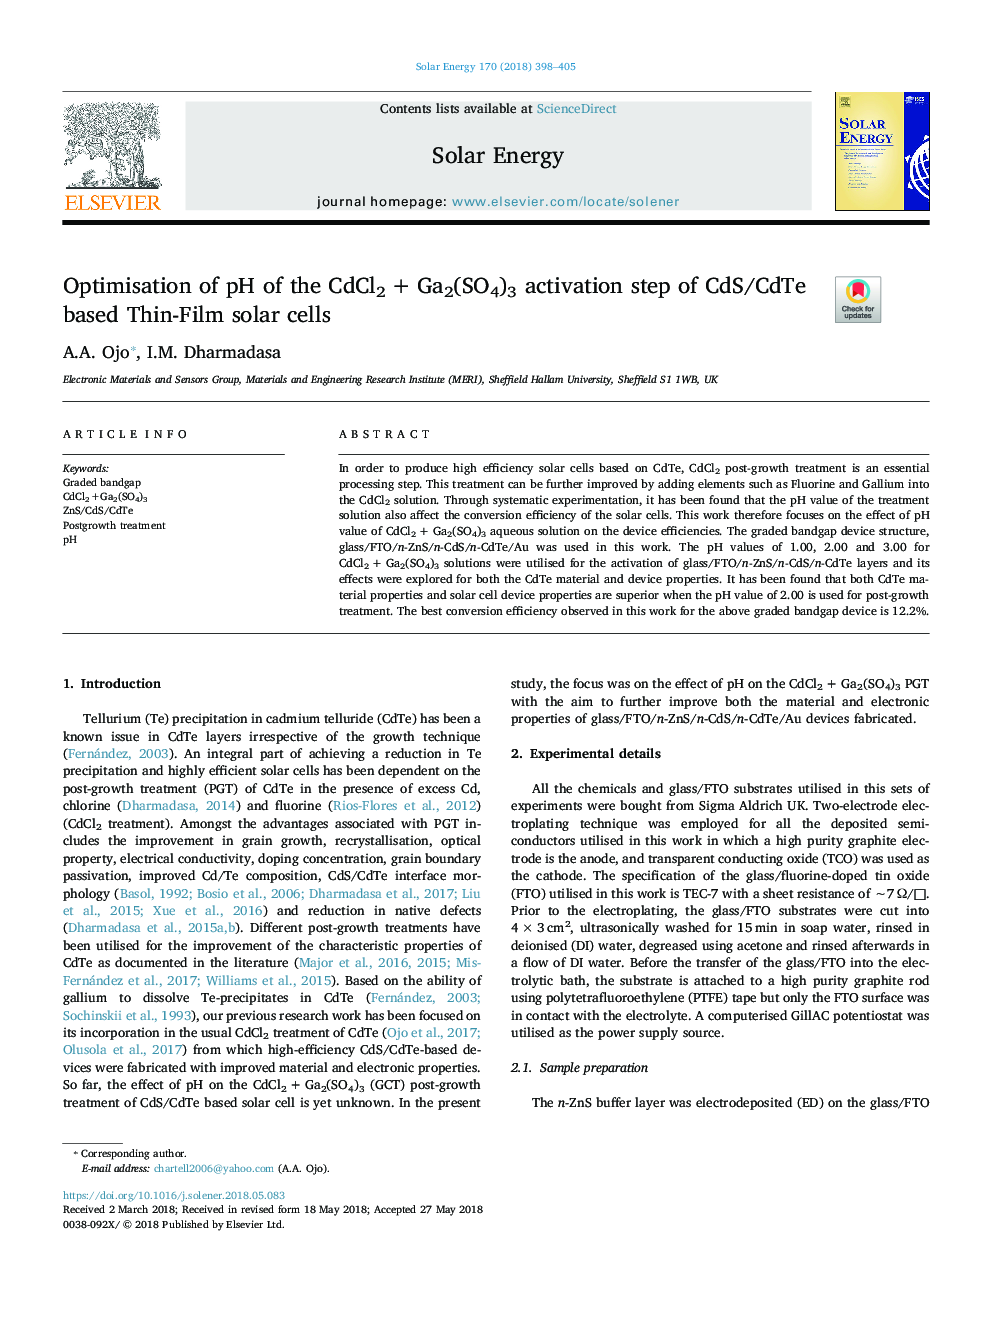 Optimisation of pH of the CdCl2â¯+â¯Ga2(SO4)3 activation step of CdS/CdTe based Thin-Film solar cells